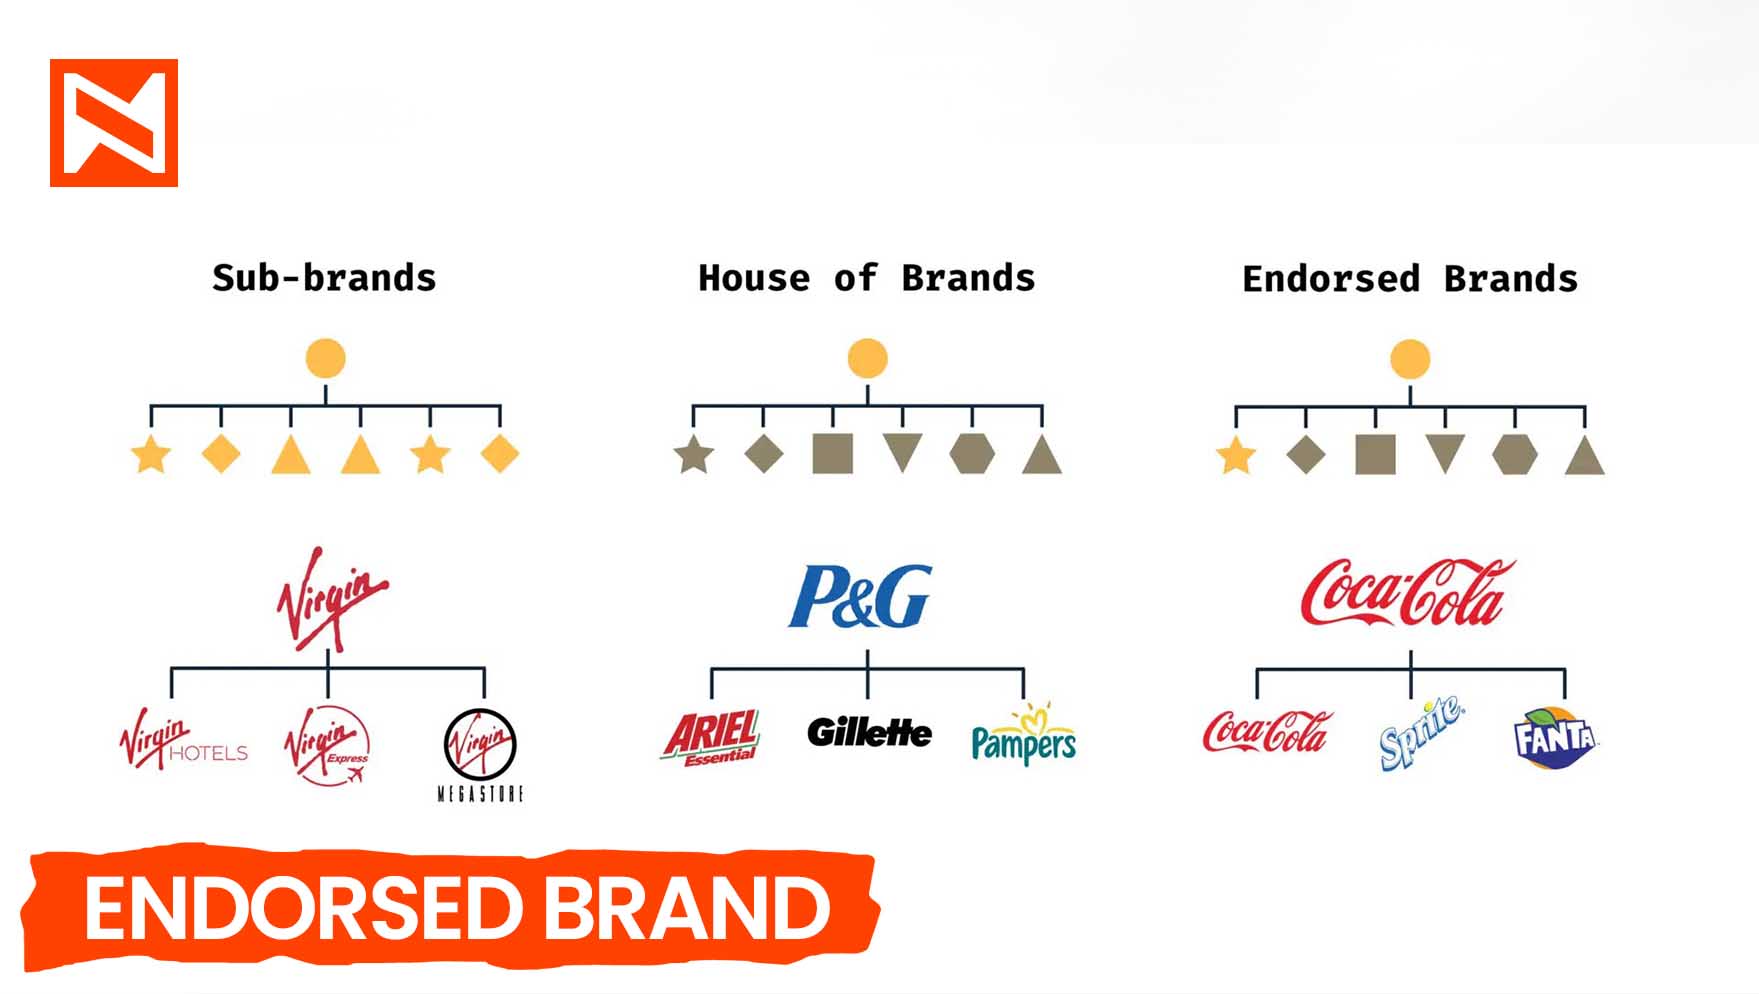 Significance of logo and taglines in brand endorsement